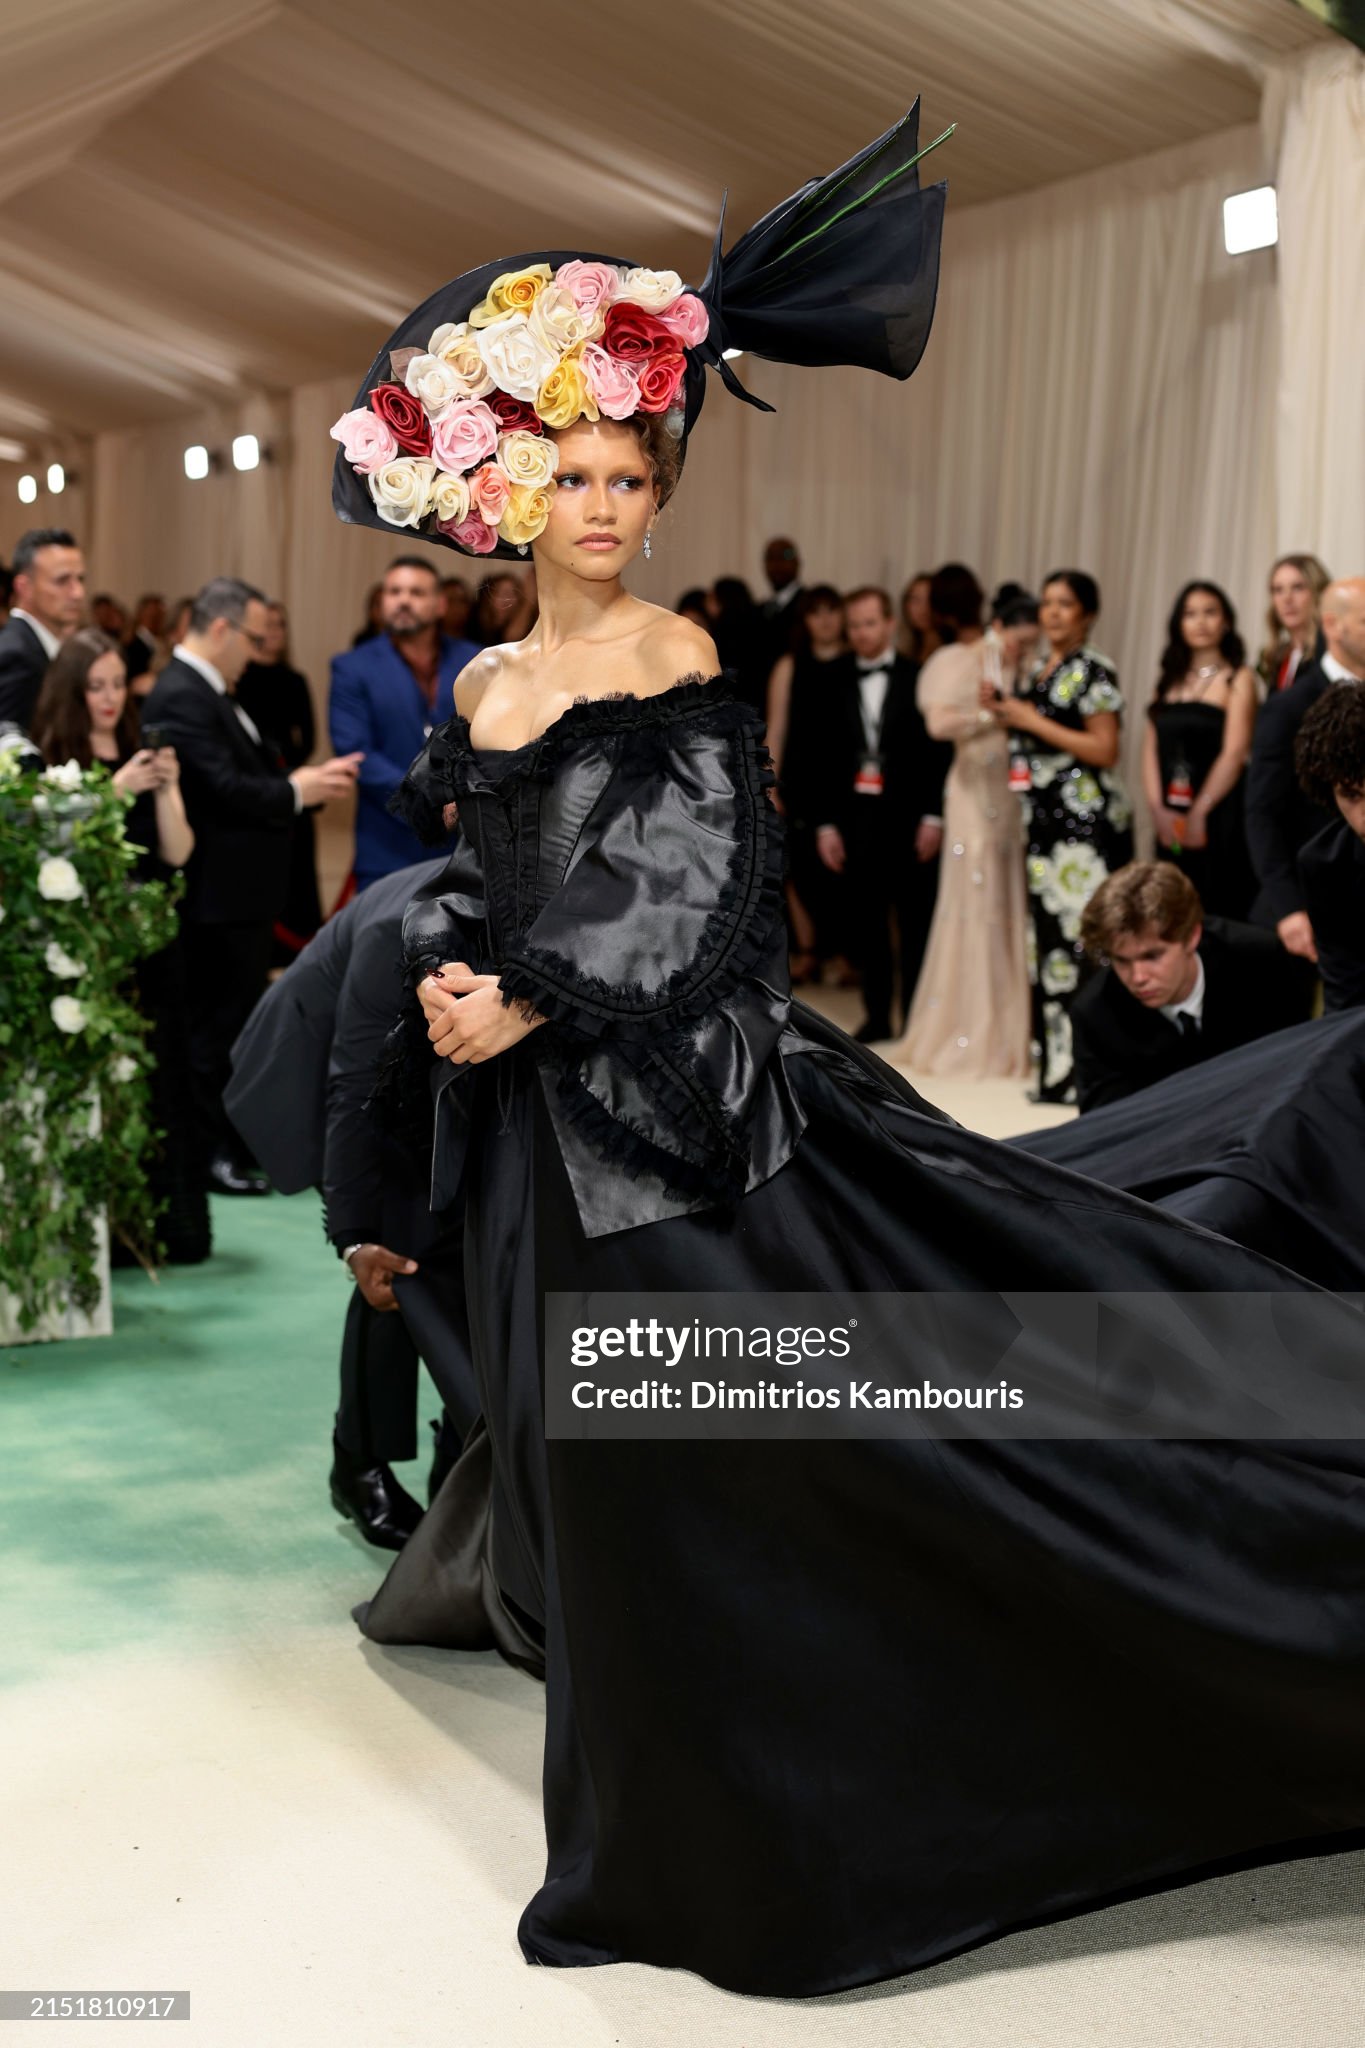 gettyimages-2151810917-2048x2048.jpg